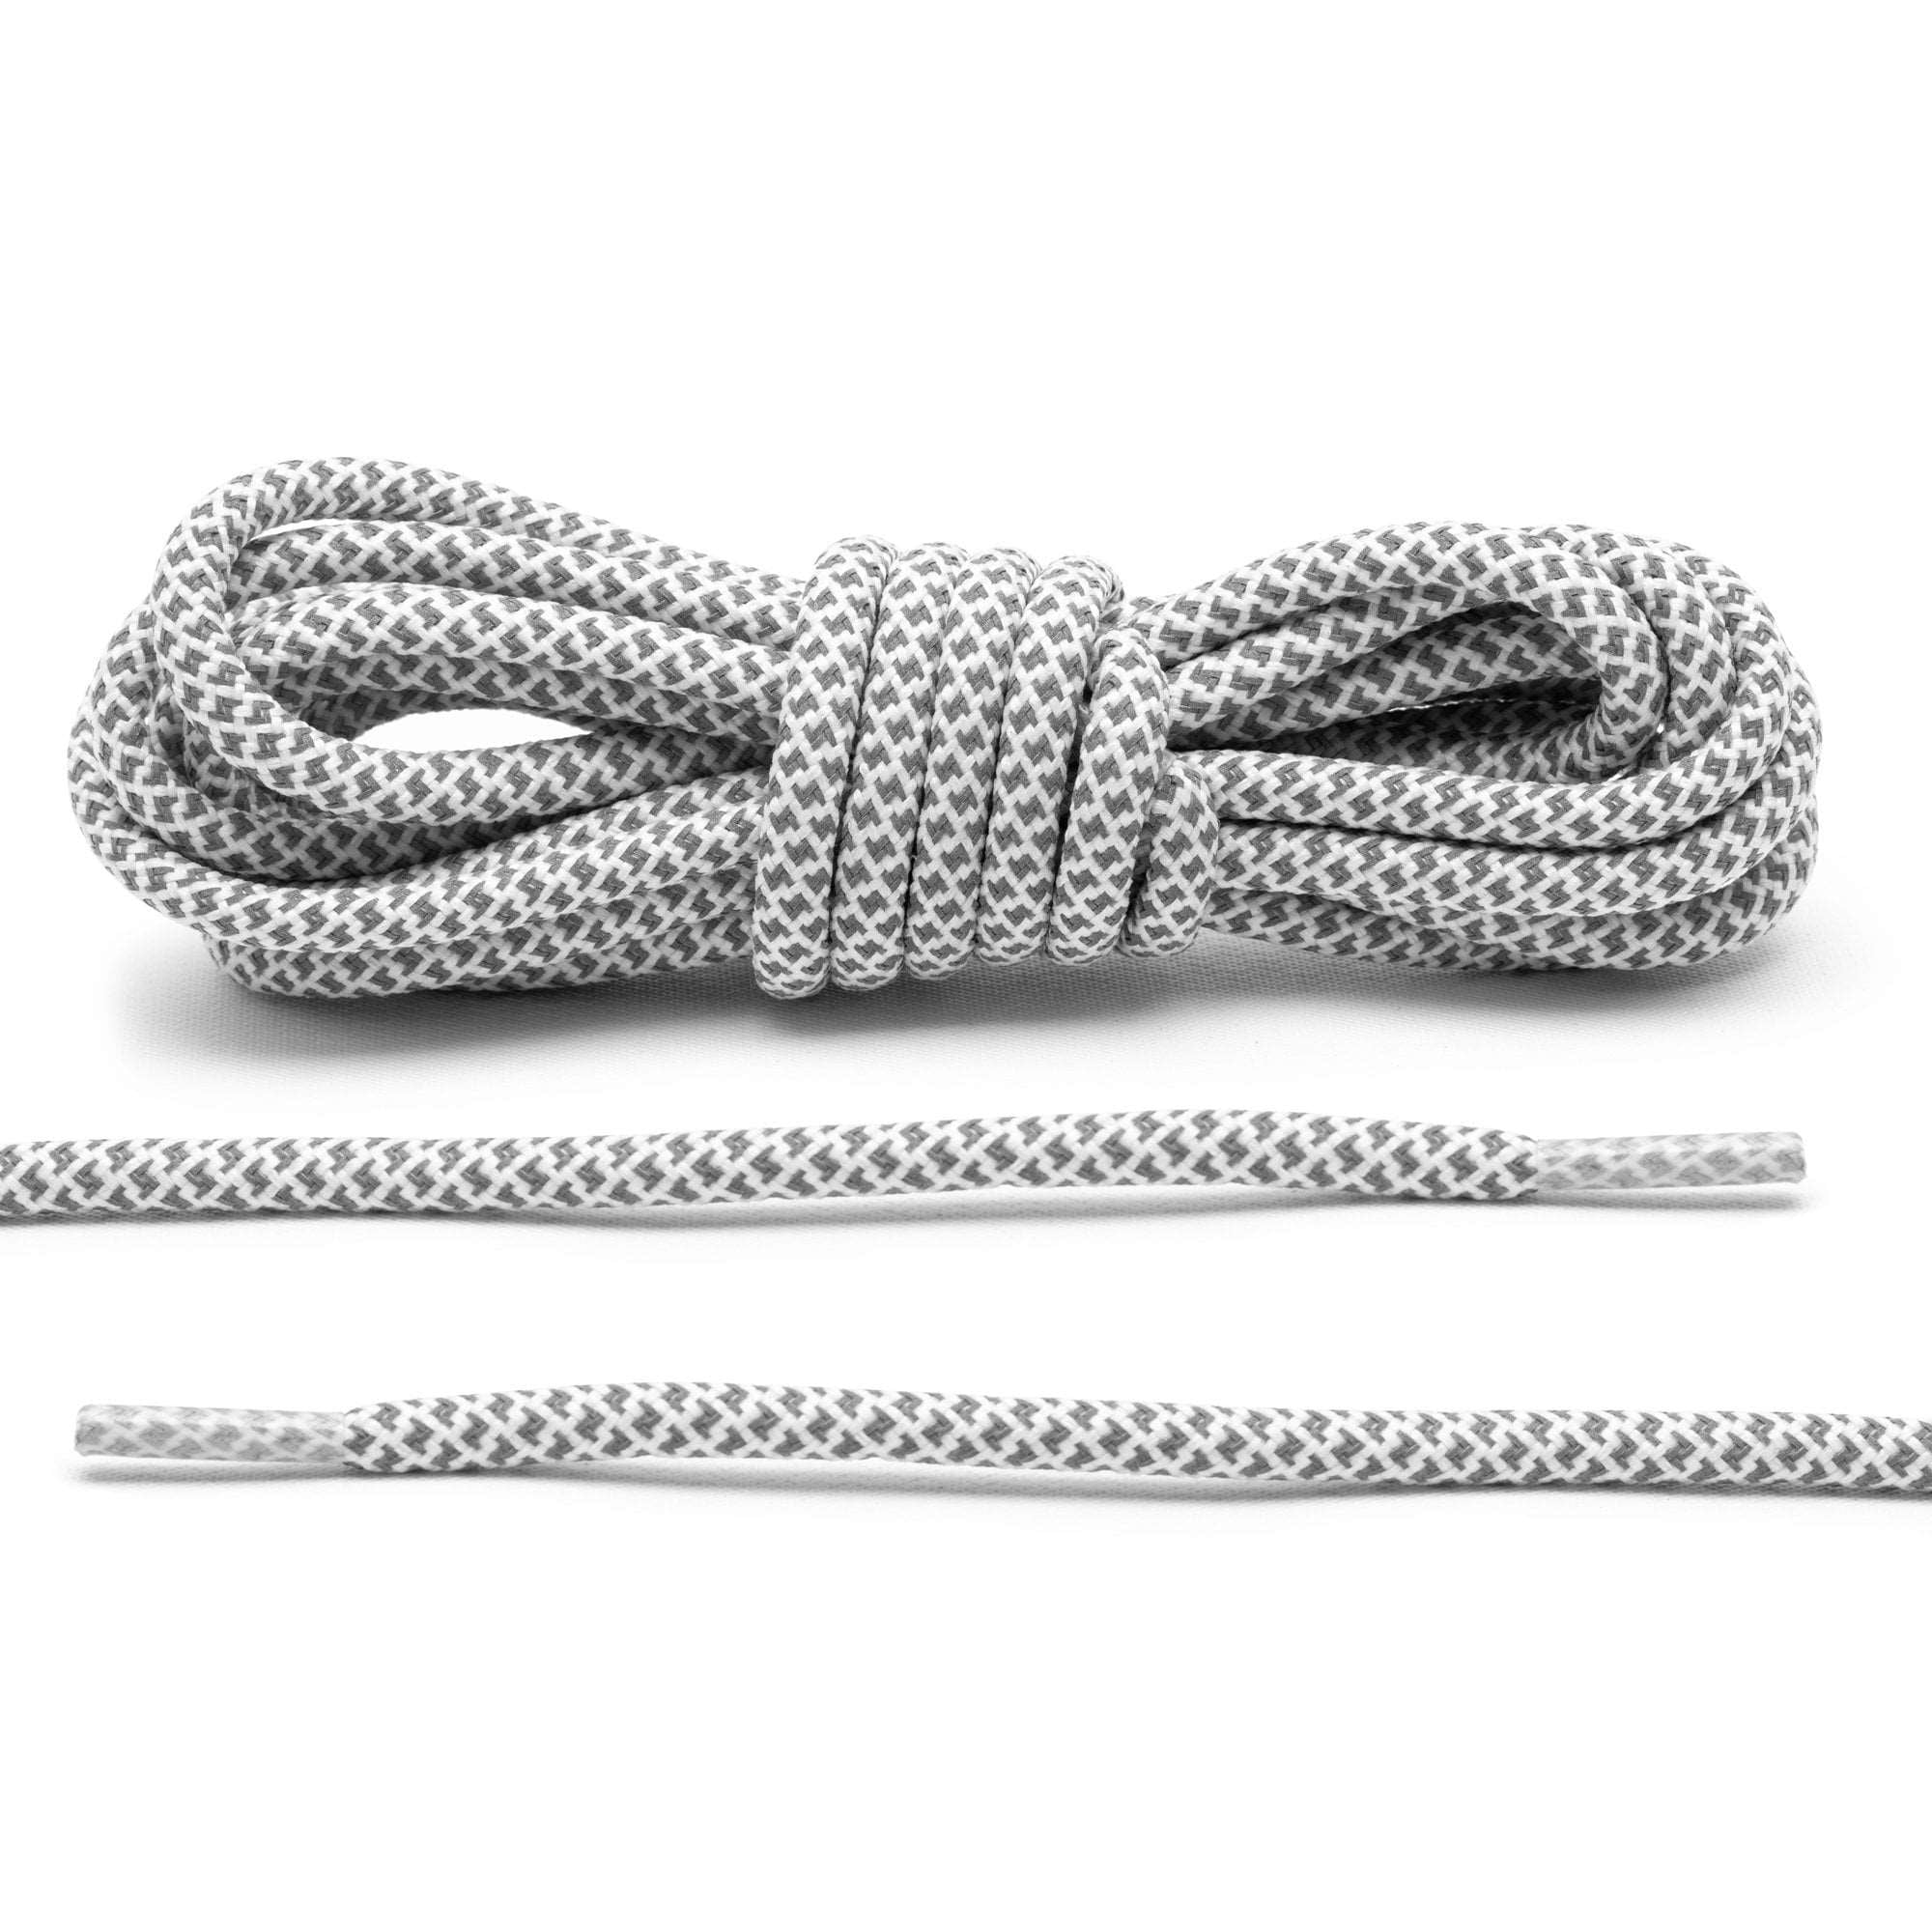 ROUND CORD SHOE LACES HONEYCOMB YEEZY ROPE PATTERN ADIDAS TRAINER